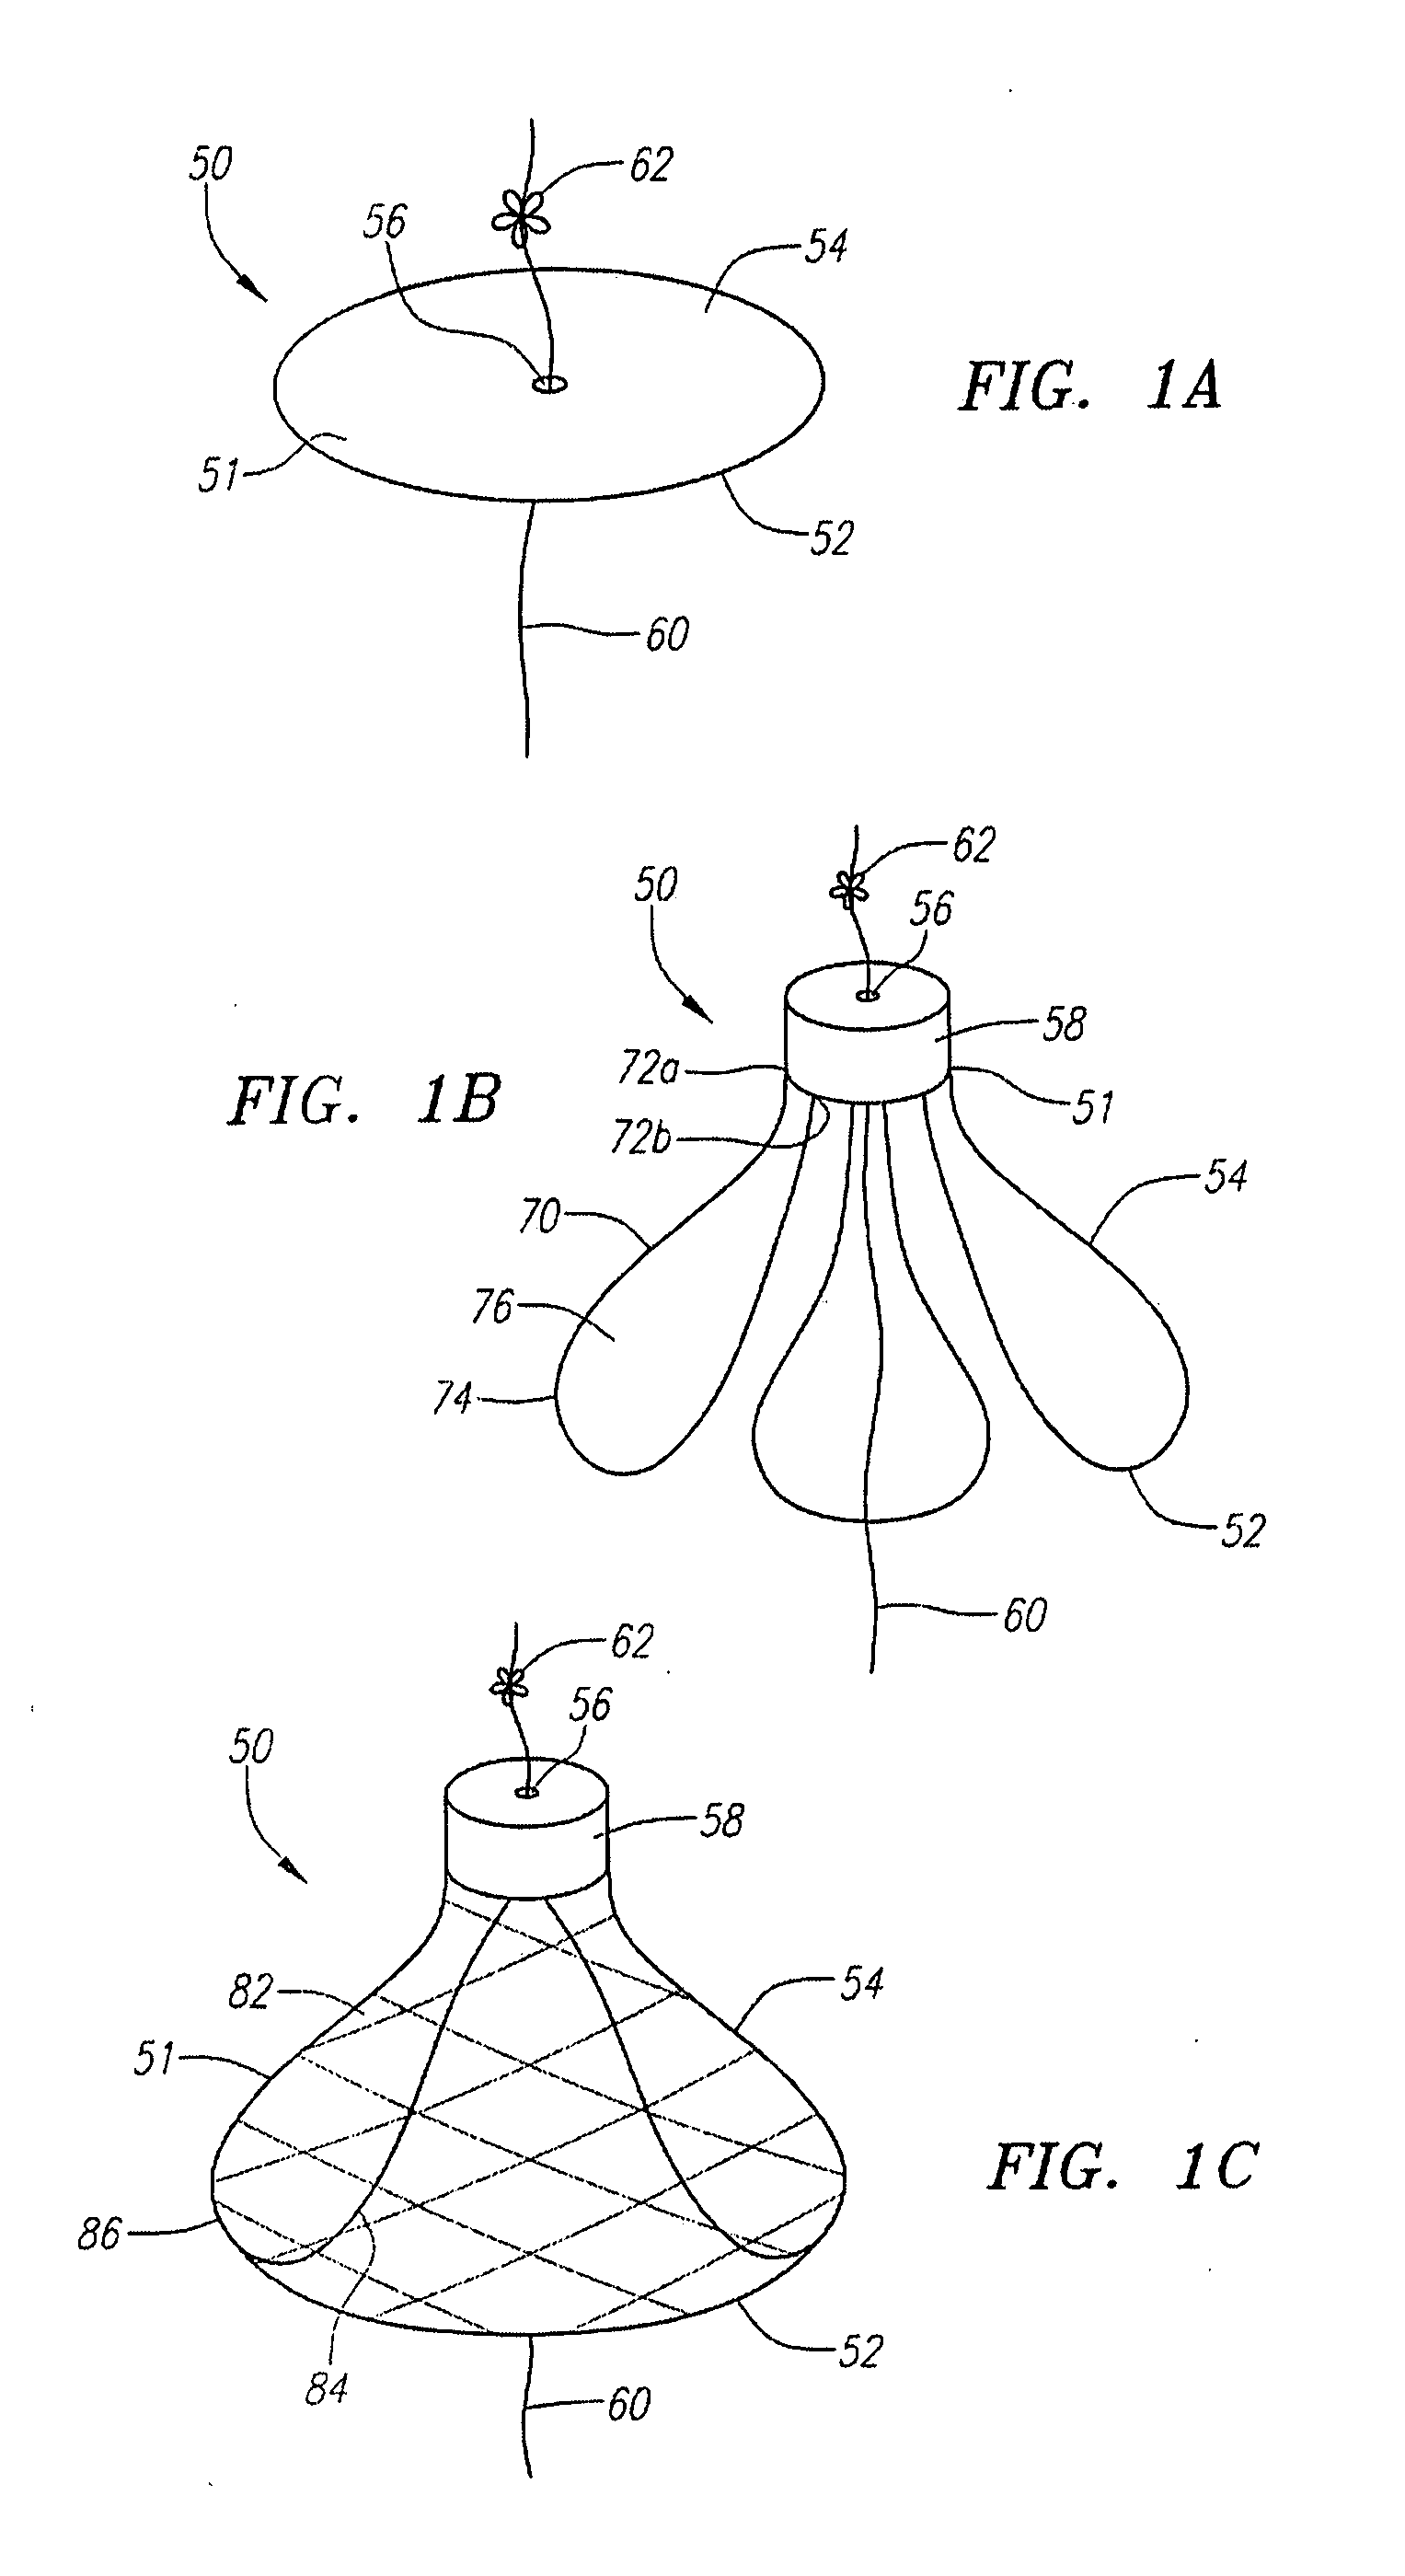 Low profile tissue anchors, tissue anchor systems, and methods for their delivery and use